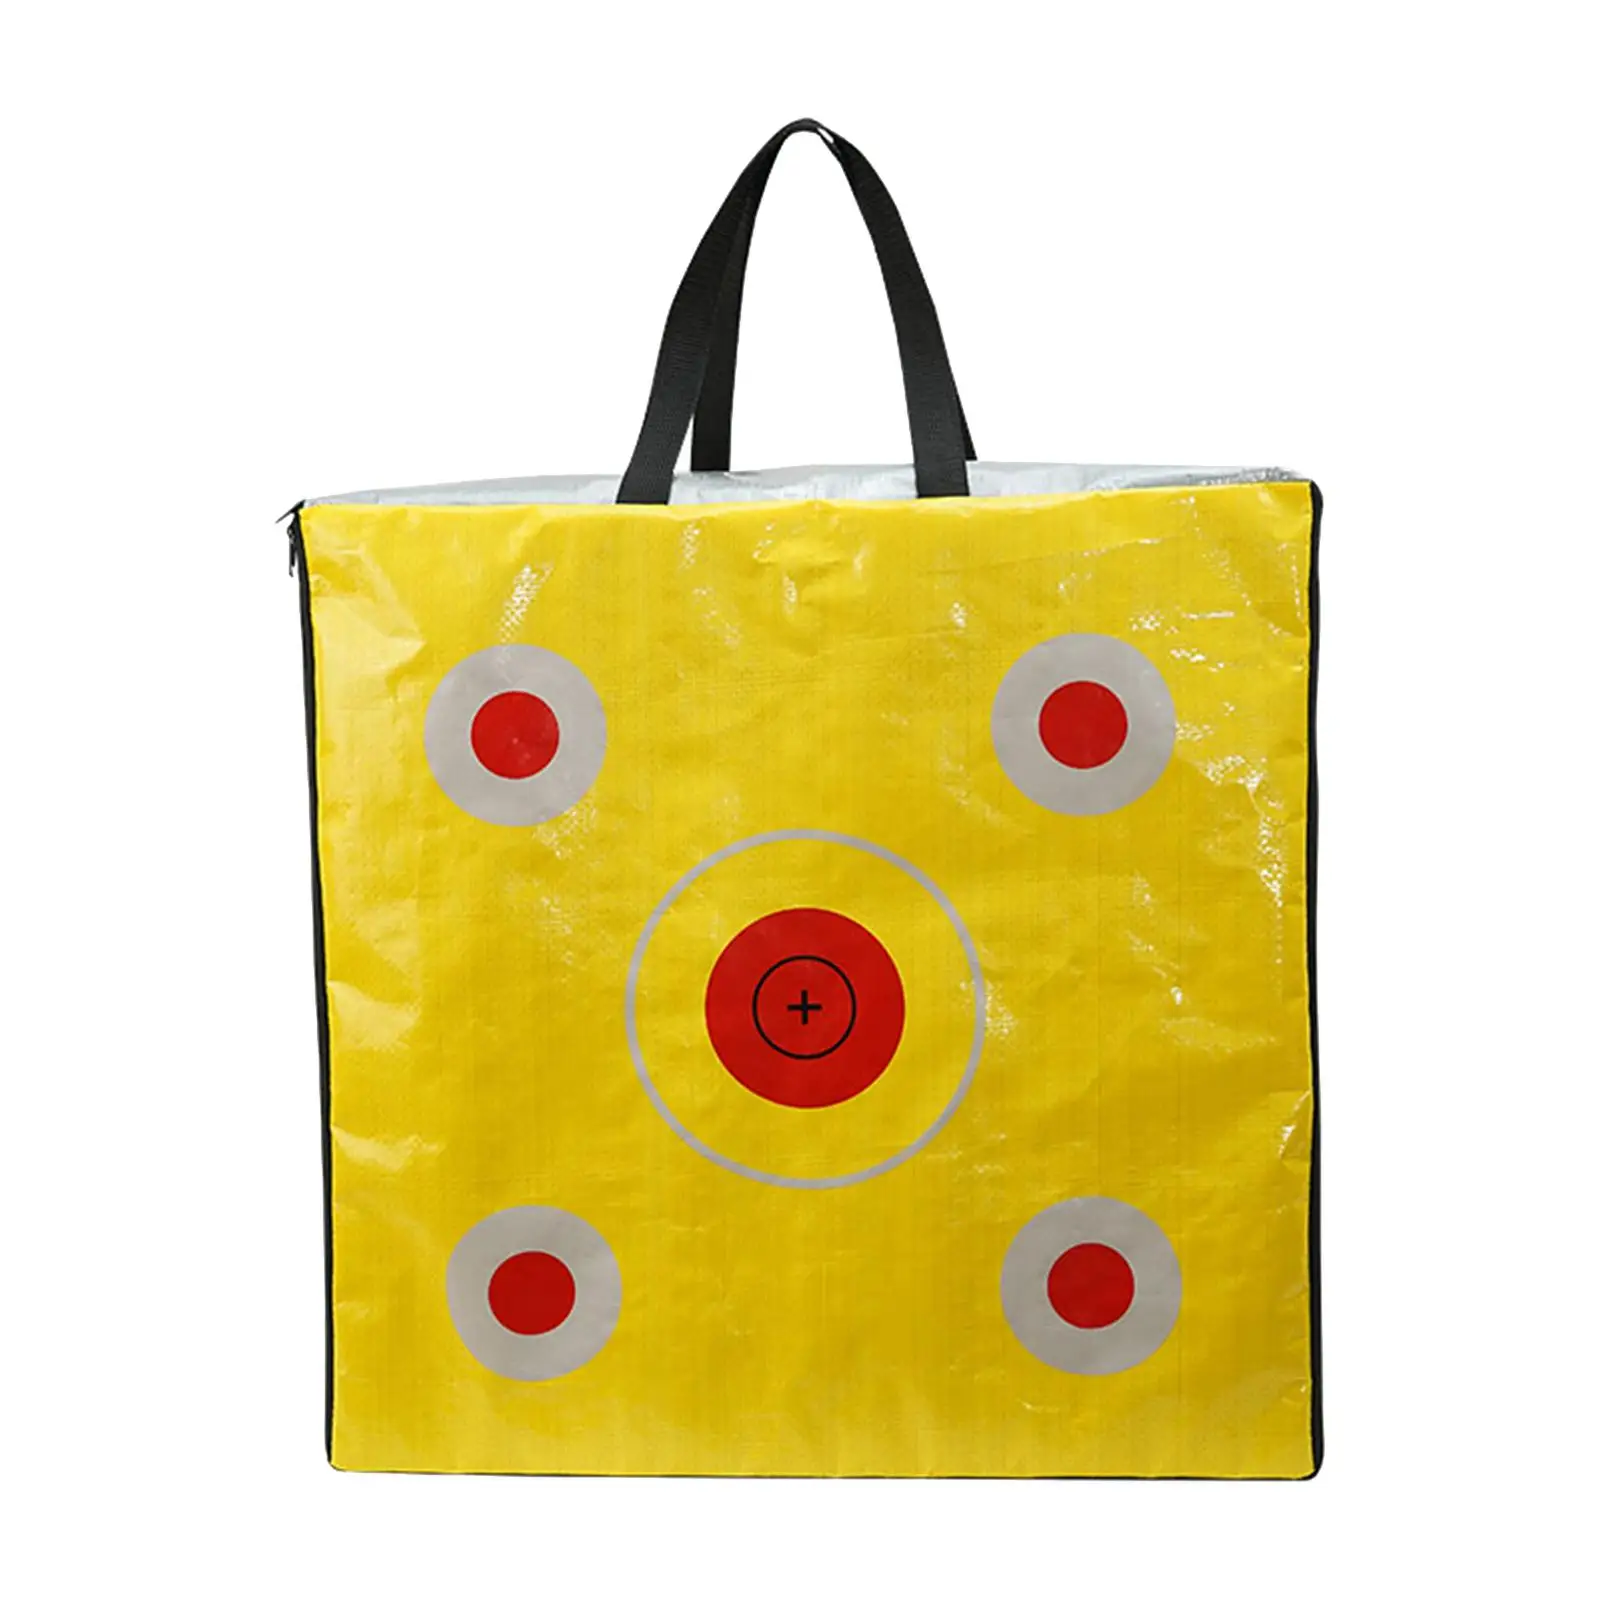 Range Targets with Carrying Handle Field Point Bag Archery Target Moving Targets Shooting Targets for Training Sports Practice